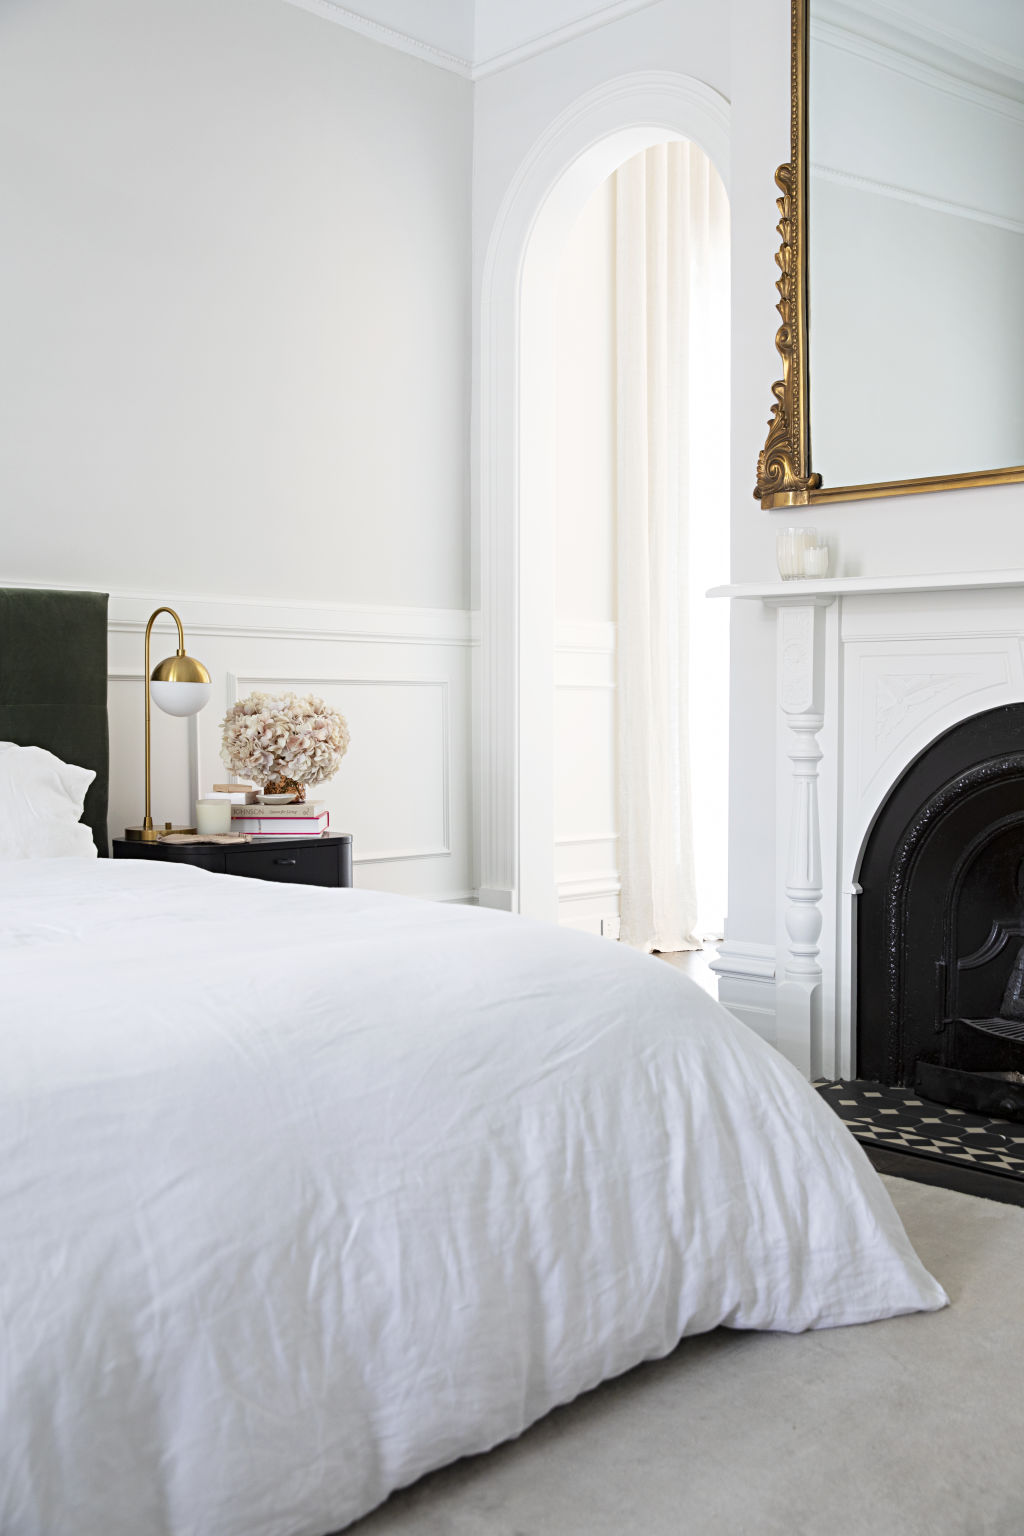 The main bedroom comes with high ceilings, plenty of light and a feature fireplace. Photo: Natalie Jeffcott